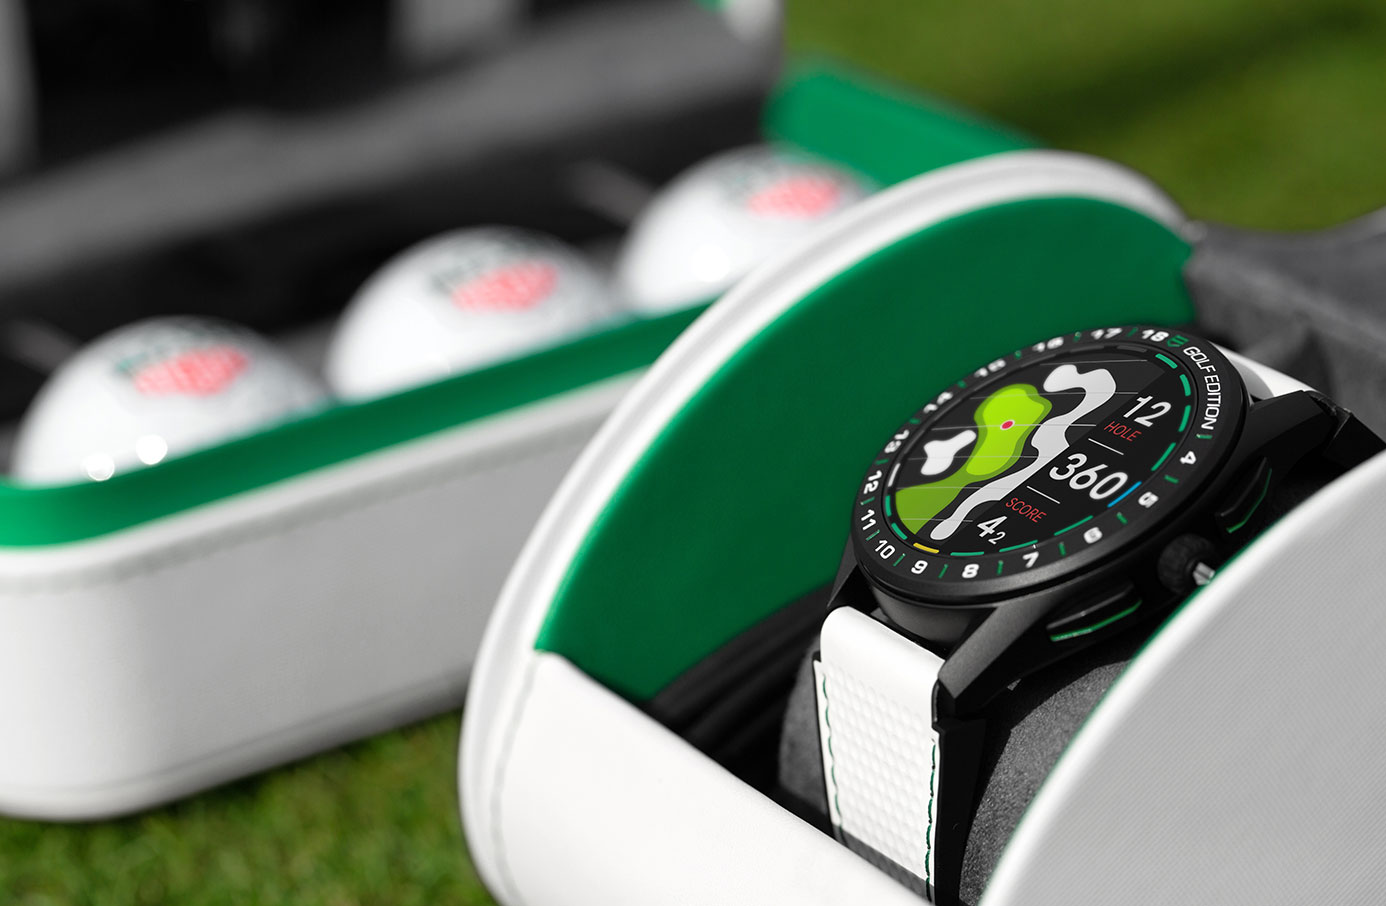 TAG HEUER CONNECTED GOLF EDITION 